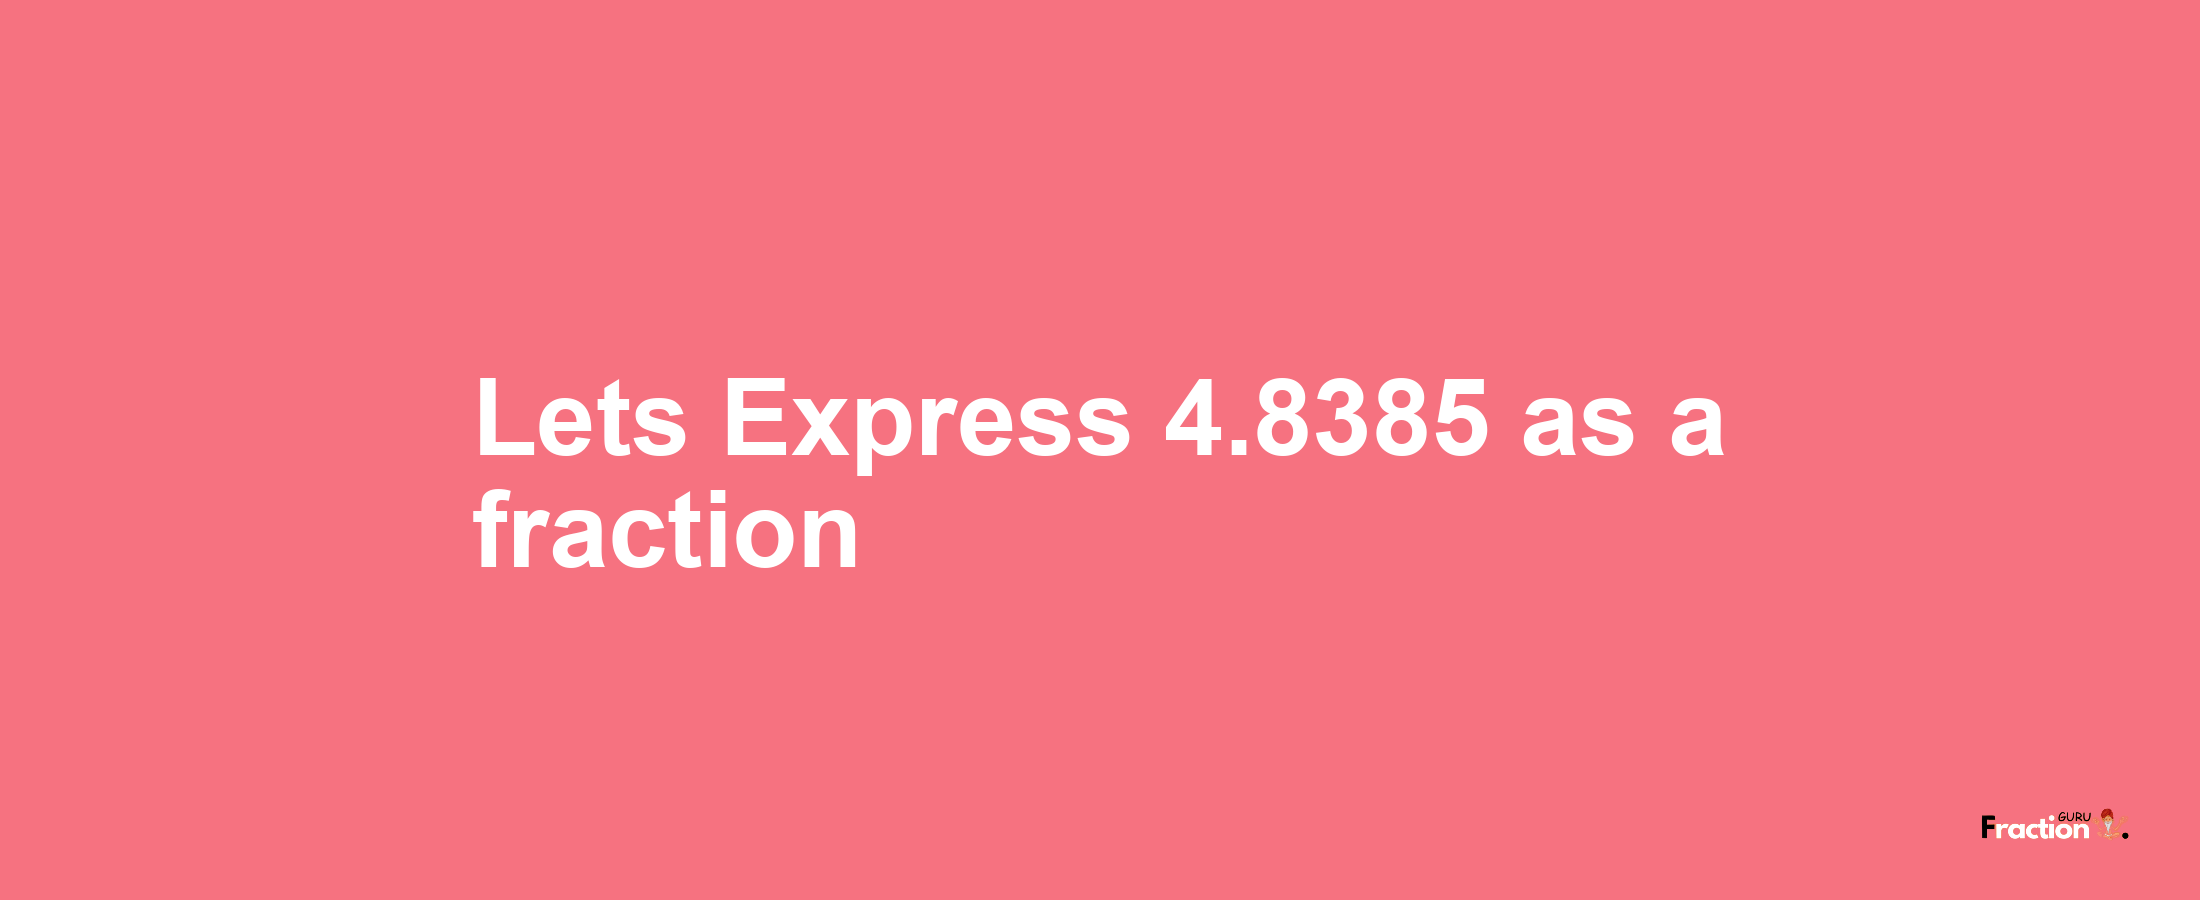 Lets Express 4.8385 as afraction